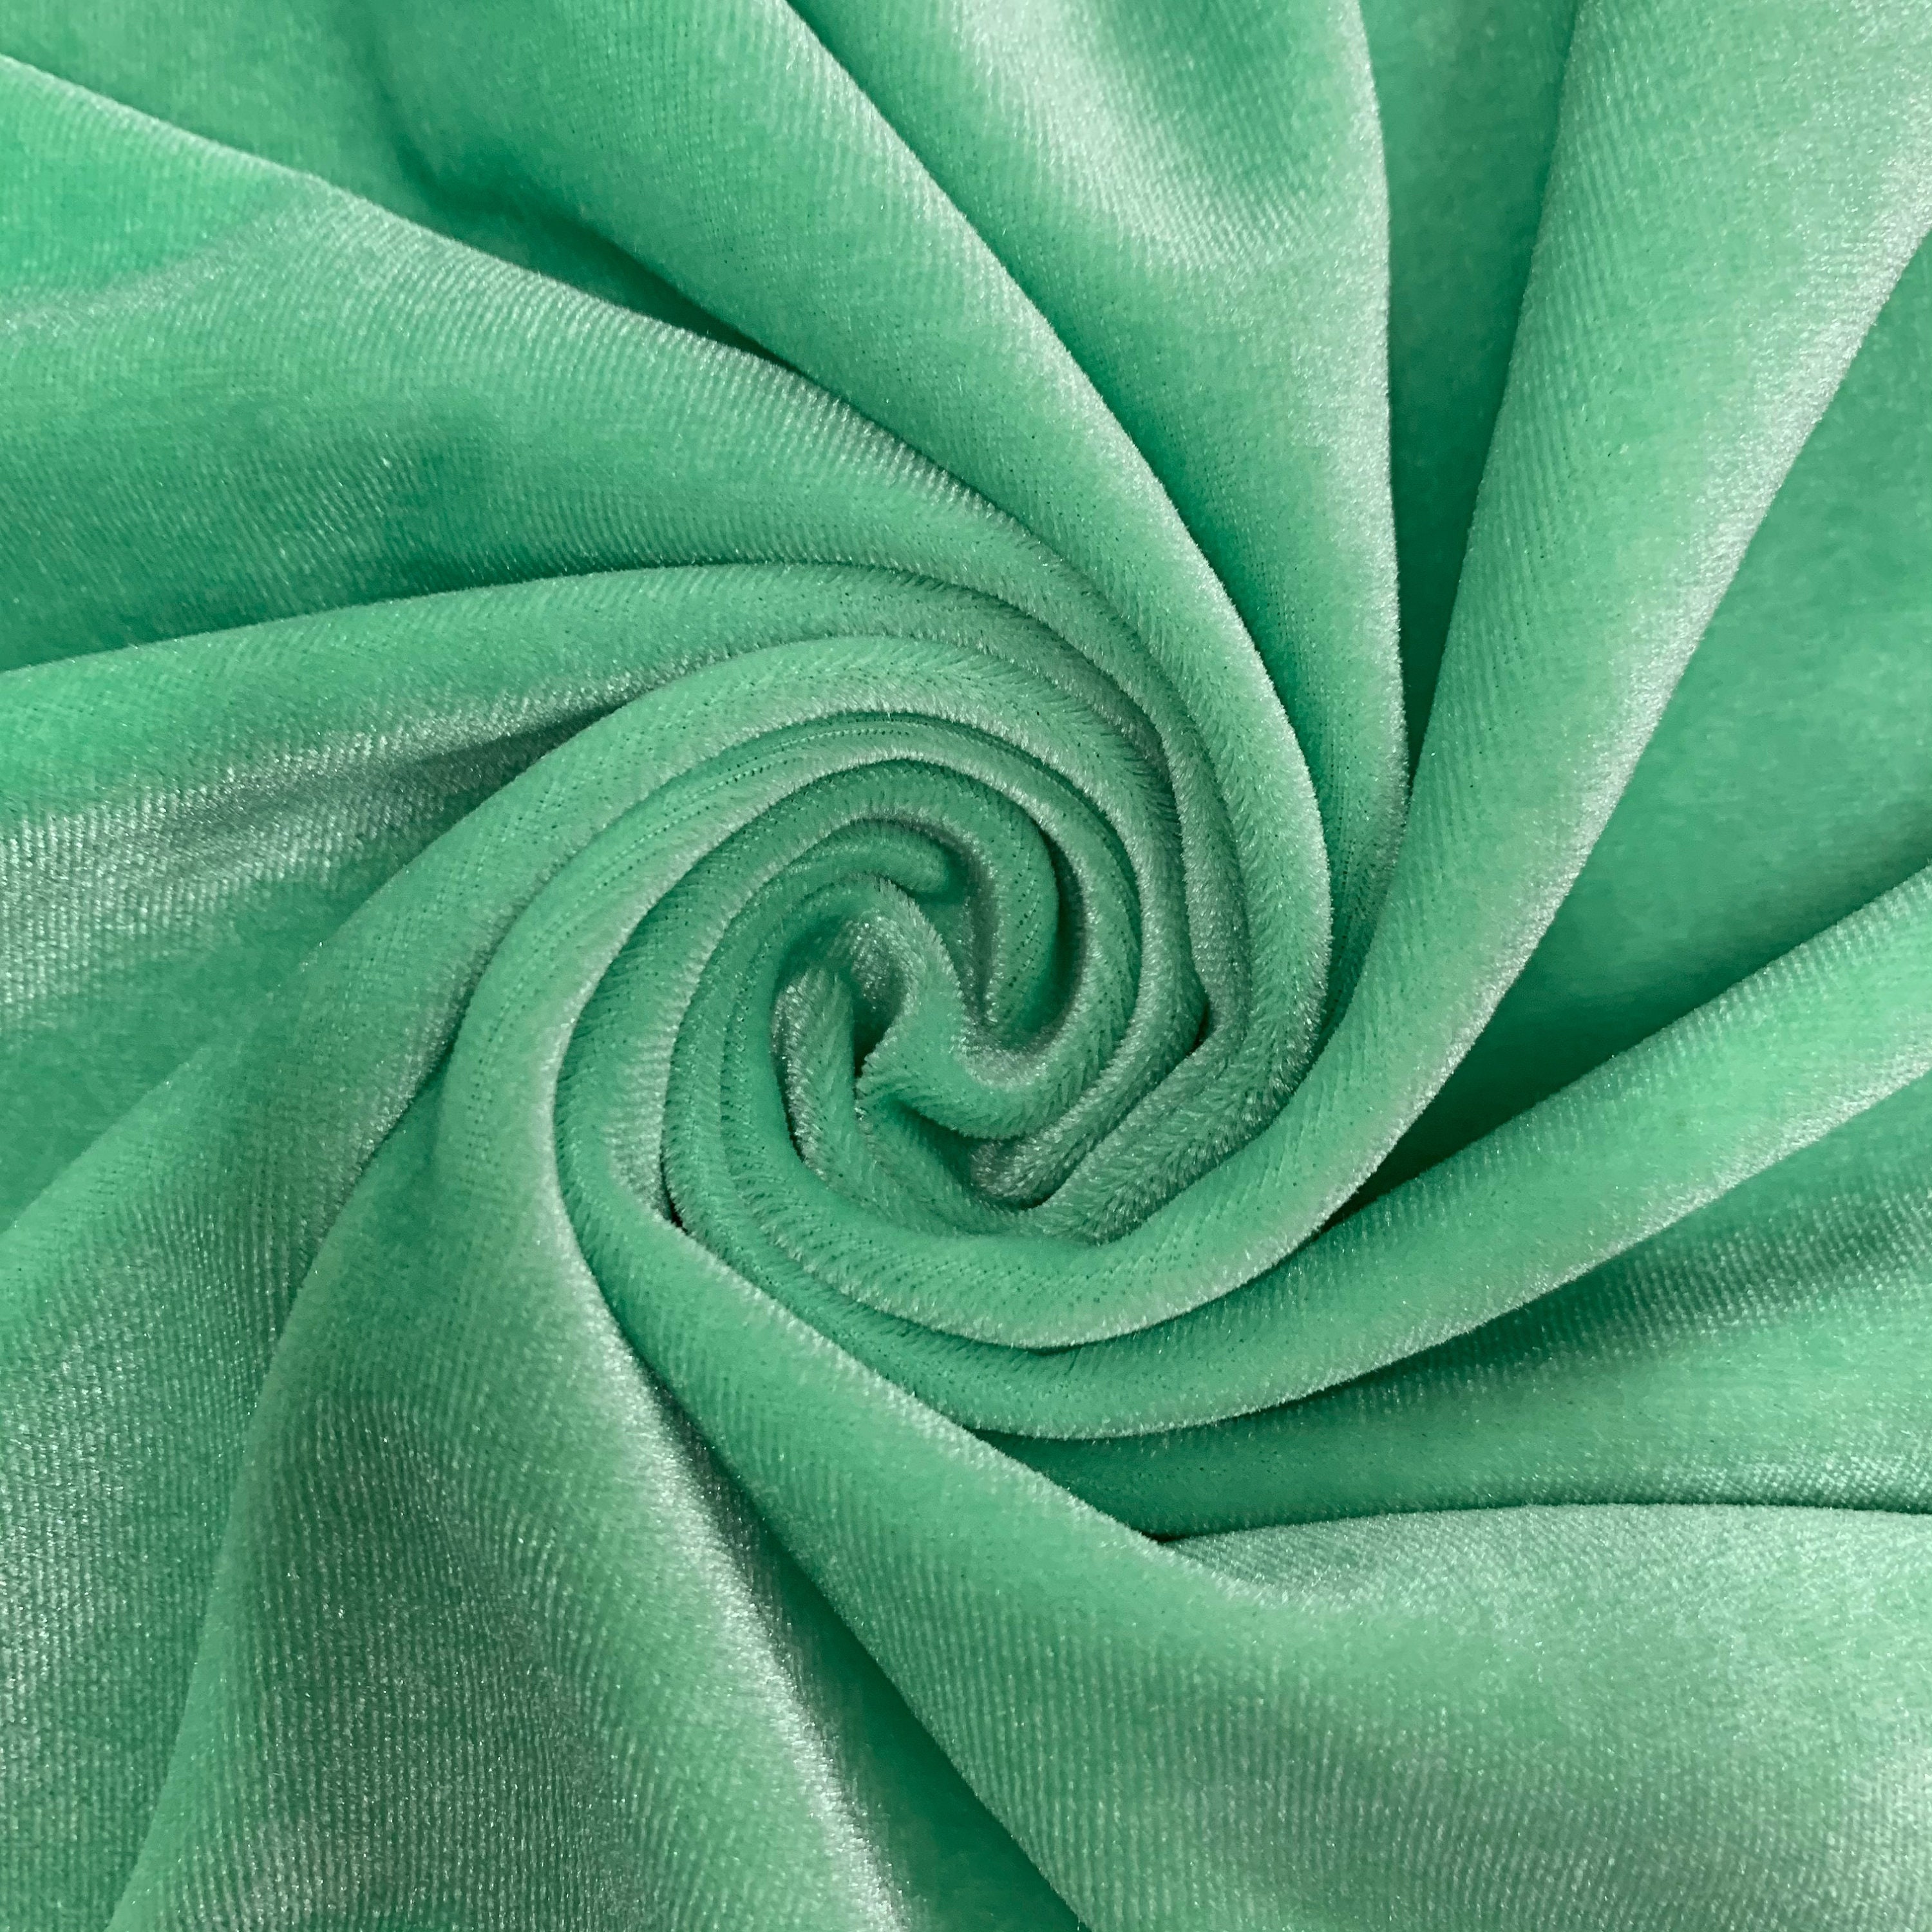 Princess MINT GREEN-B Polyester Spandex Stretch Velvet Fabric by the Yard  for Tops, Dresses, Skirts, Dance Wear, Costumes, Crafts - 10001